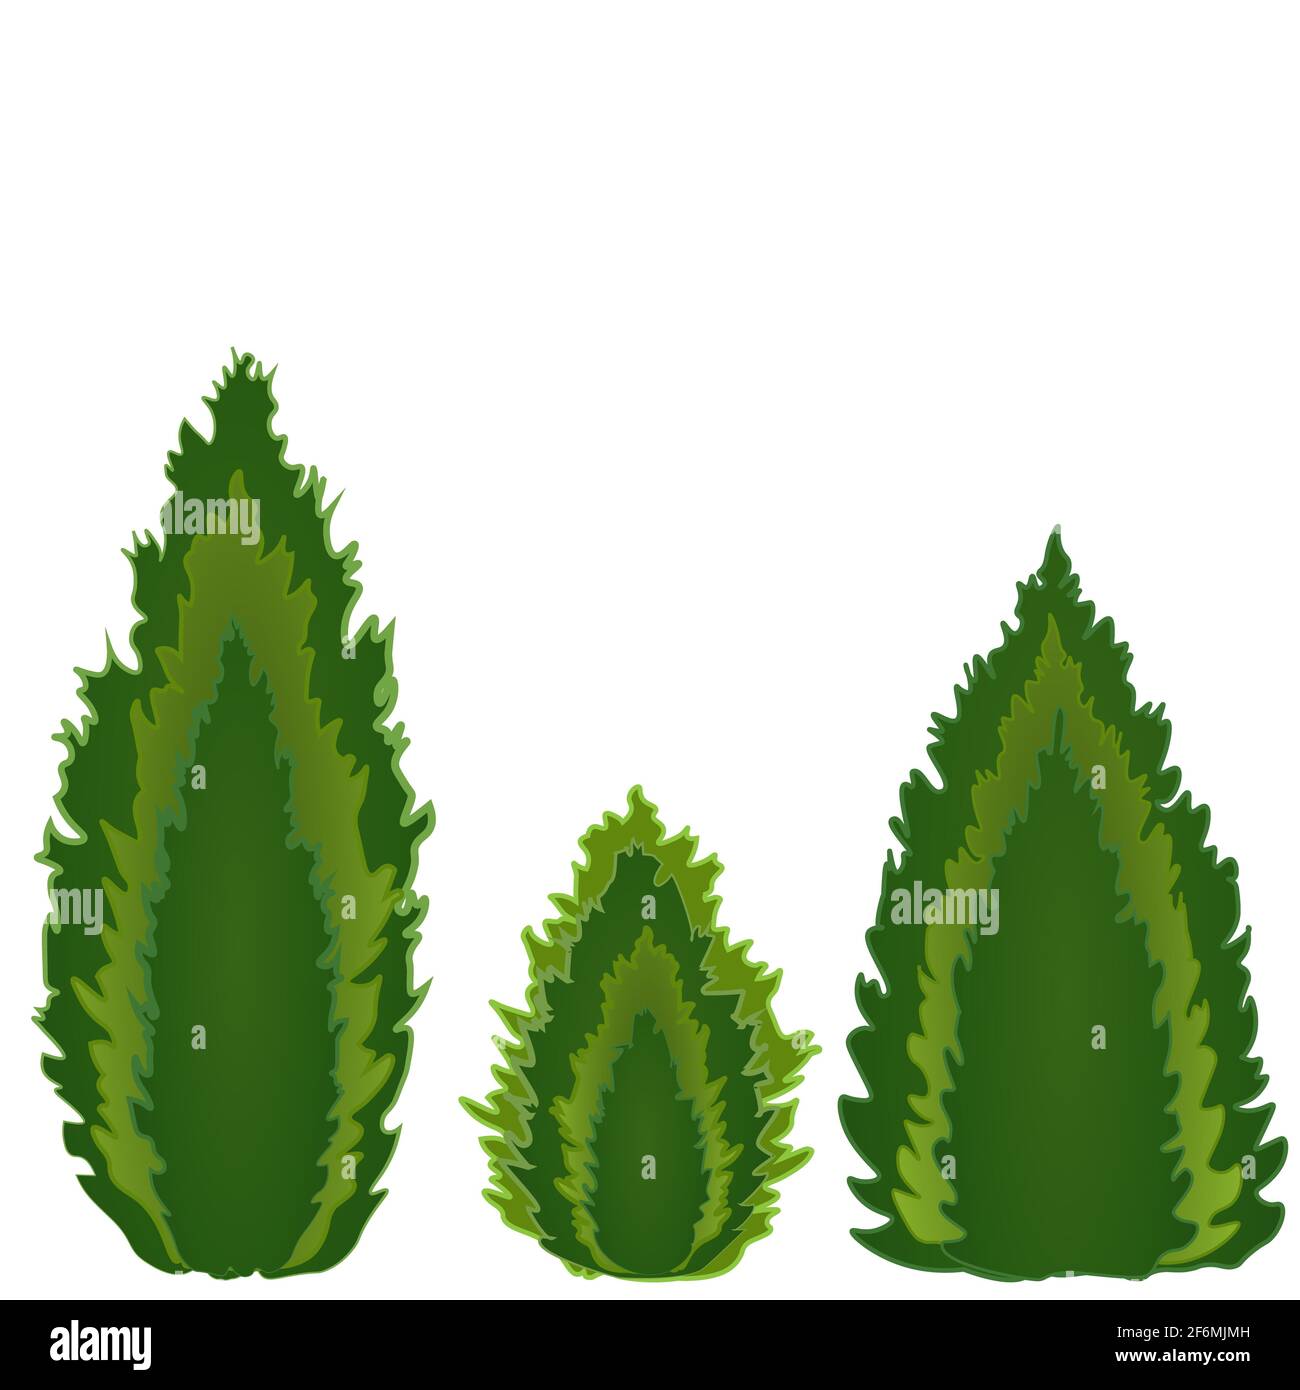 Conifers of different shapes, three kinds of conifers - tui, cypress, juniper. Piramidal, candle and drop shape Stock Photo